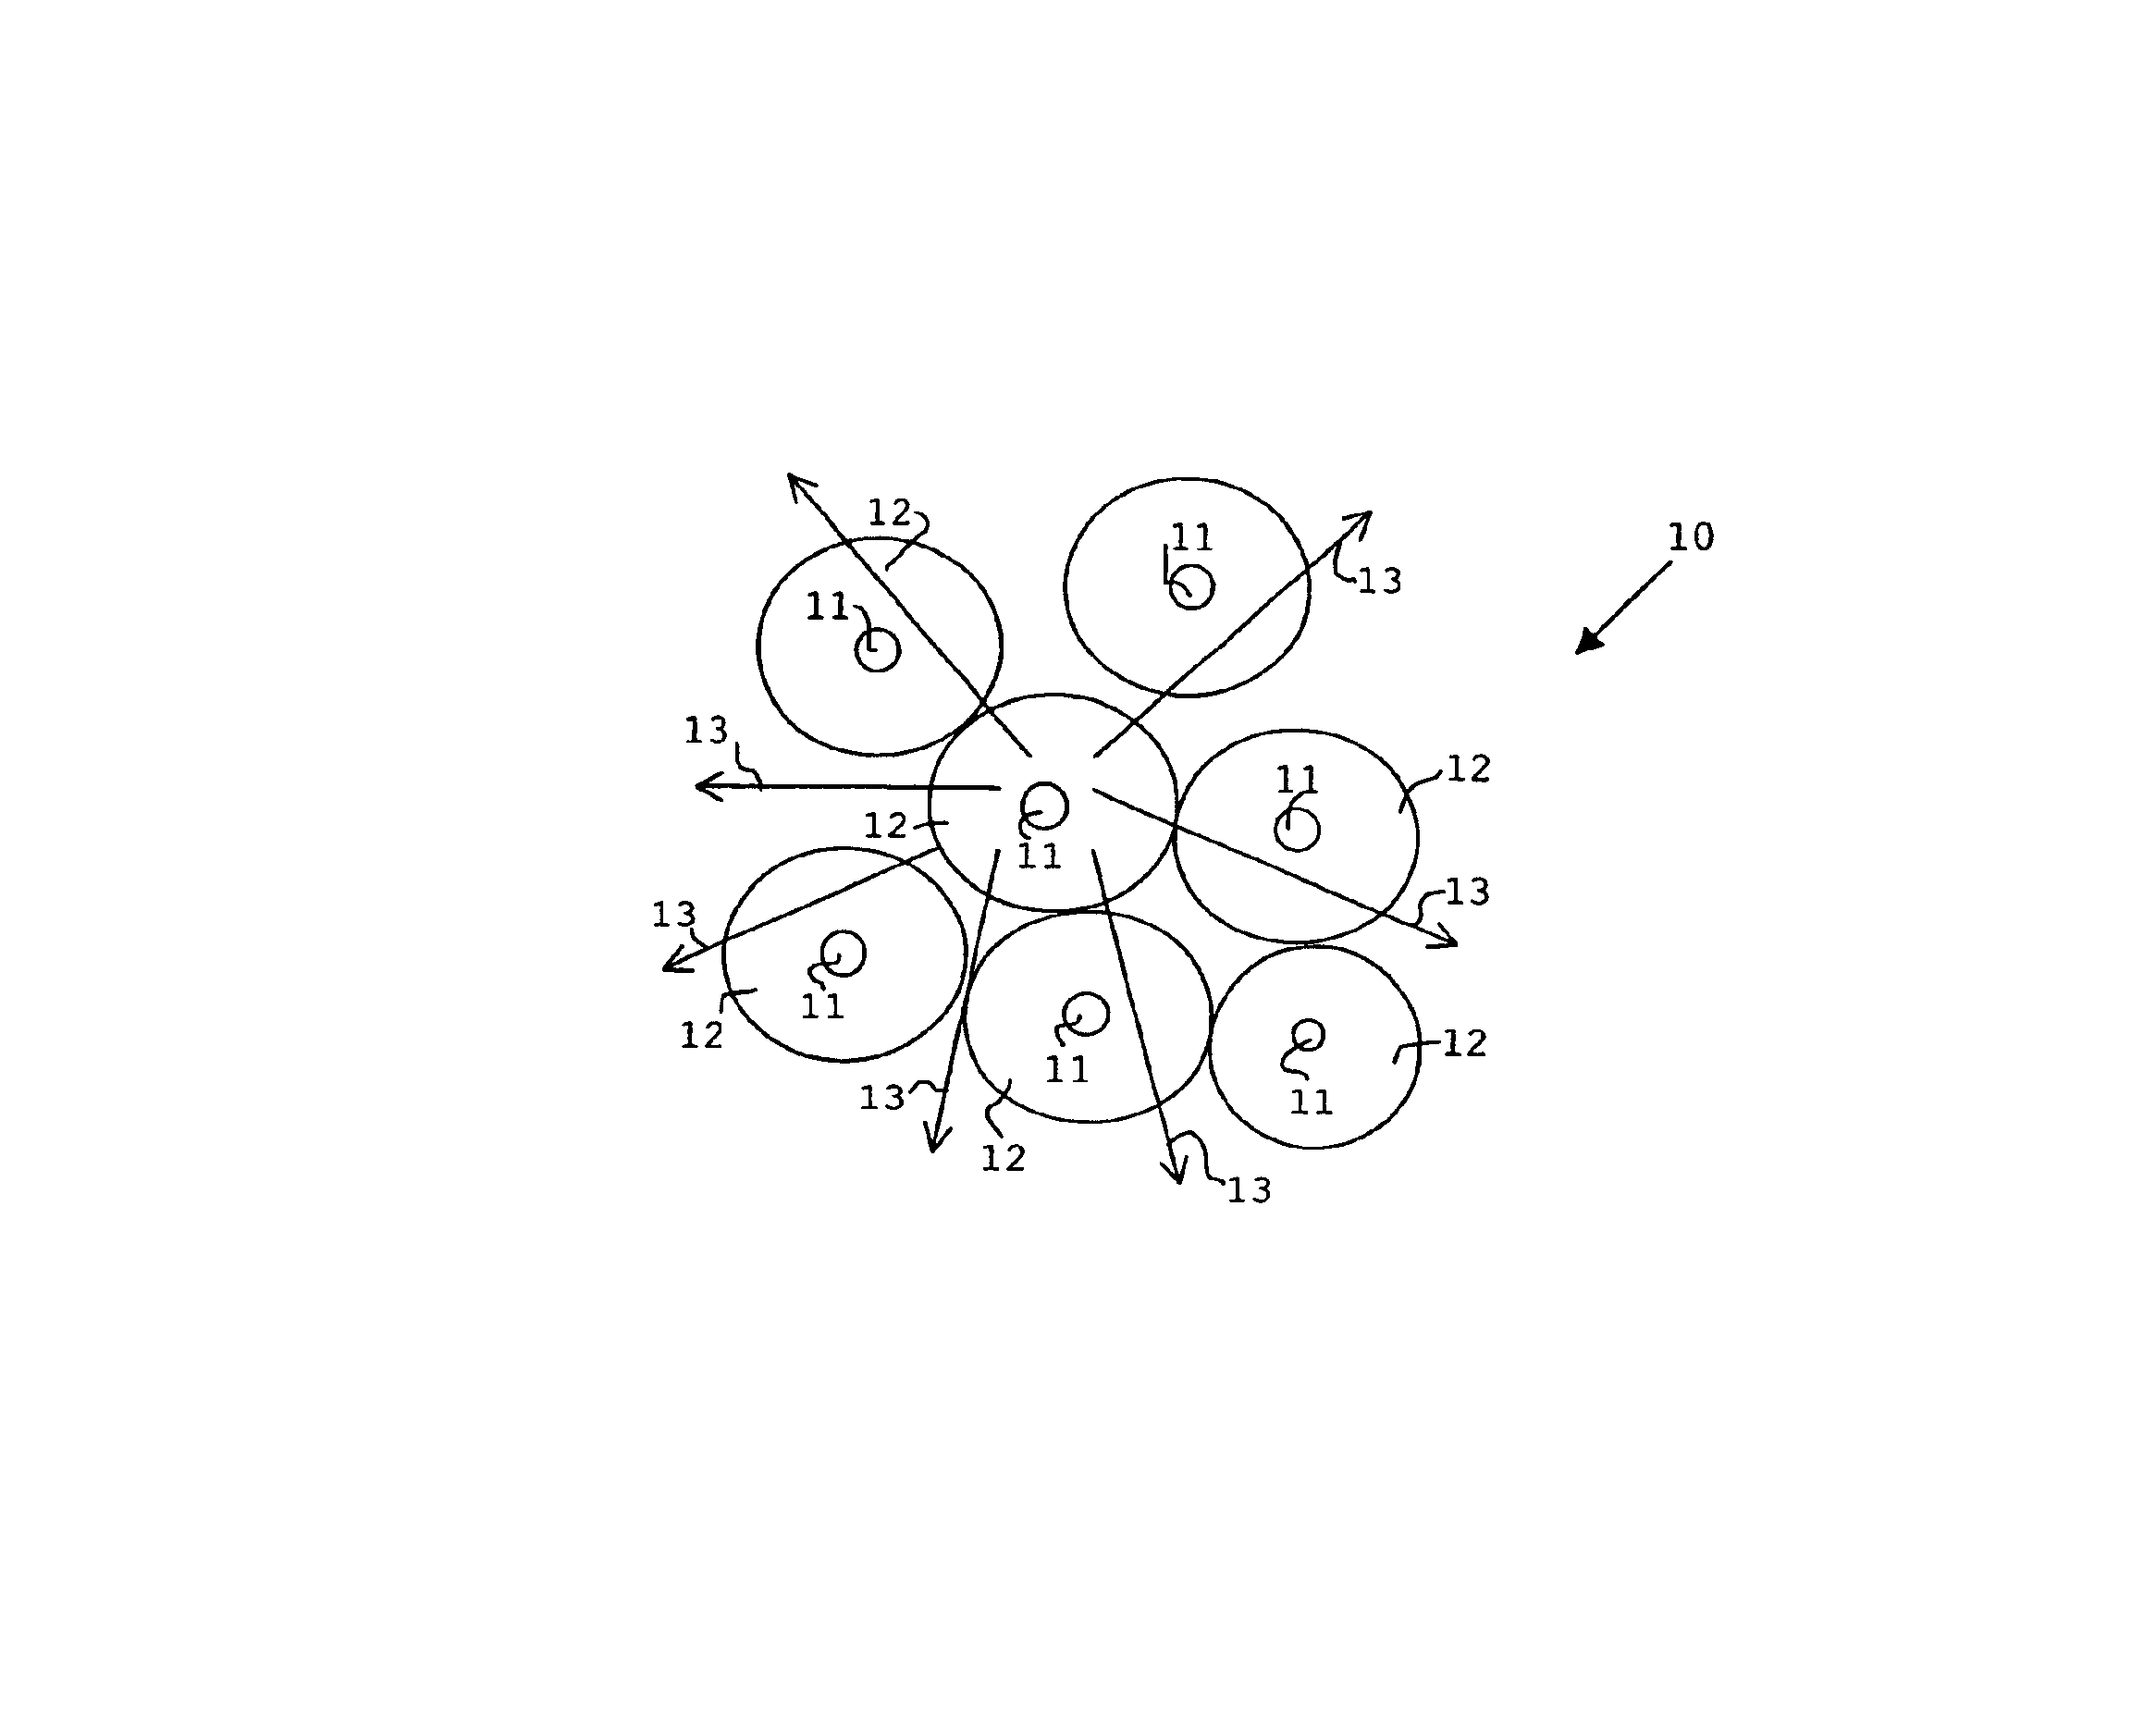 Coated phosphor filler and a method of forming the coated phosphor filler